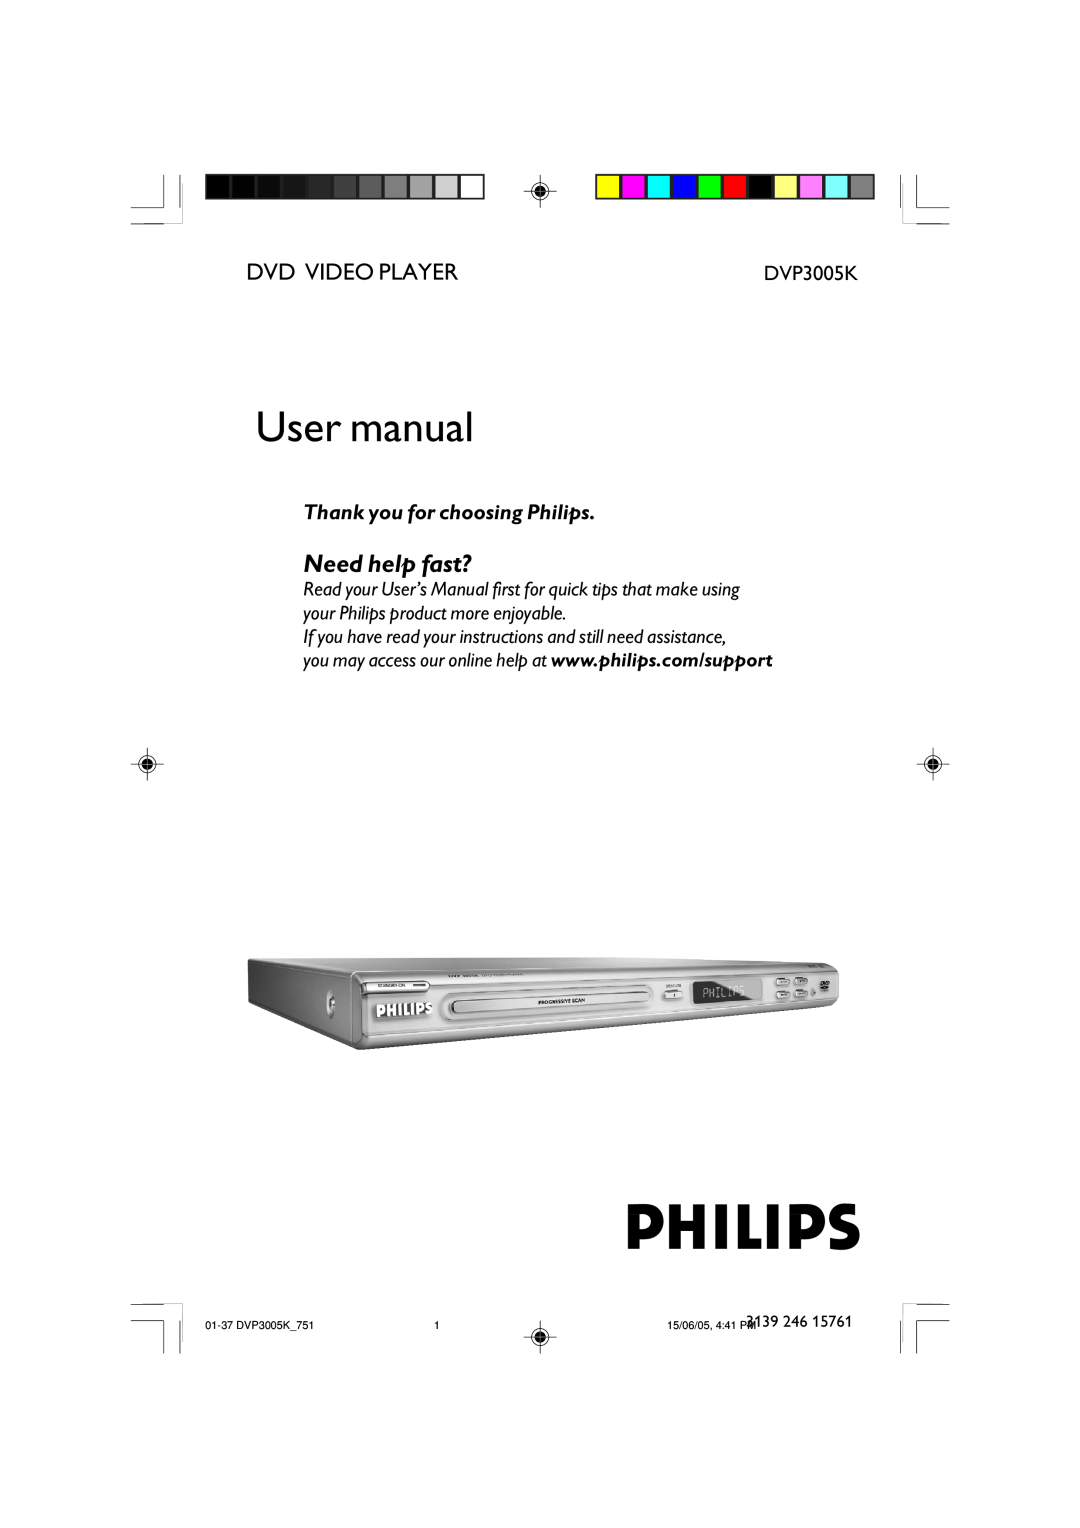 Philips DVP3005K/74 user manual User manual, Need help fast?, Dvd Video Player, Thank you for choosing Philips 